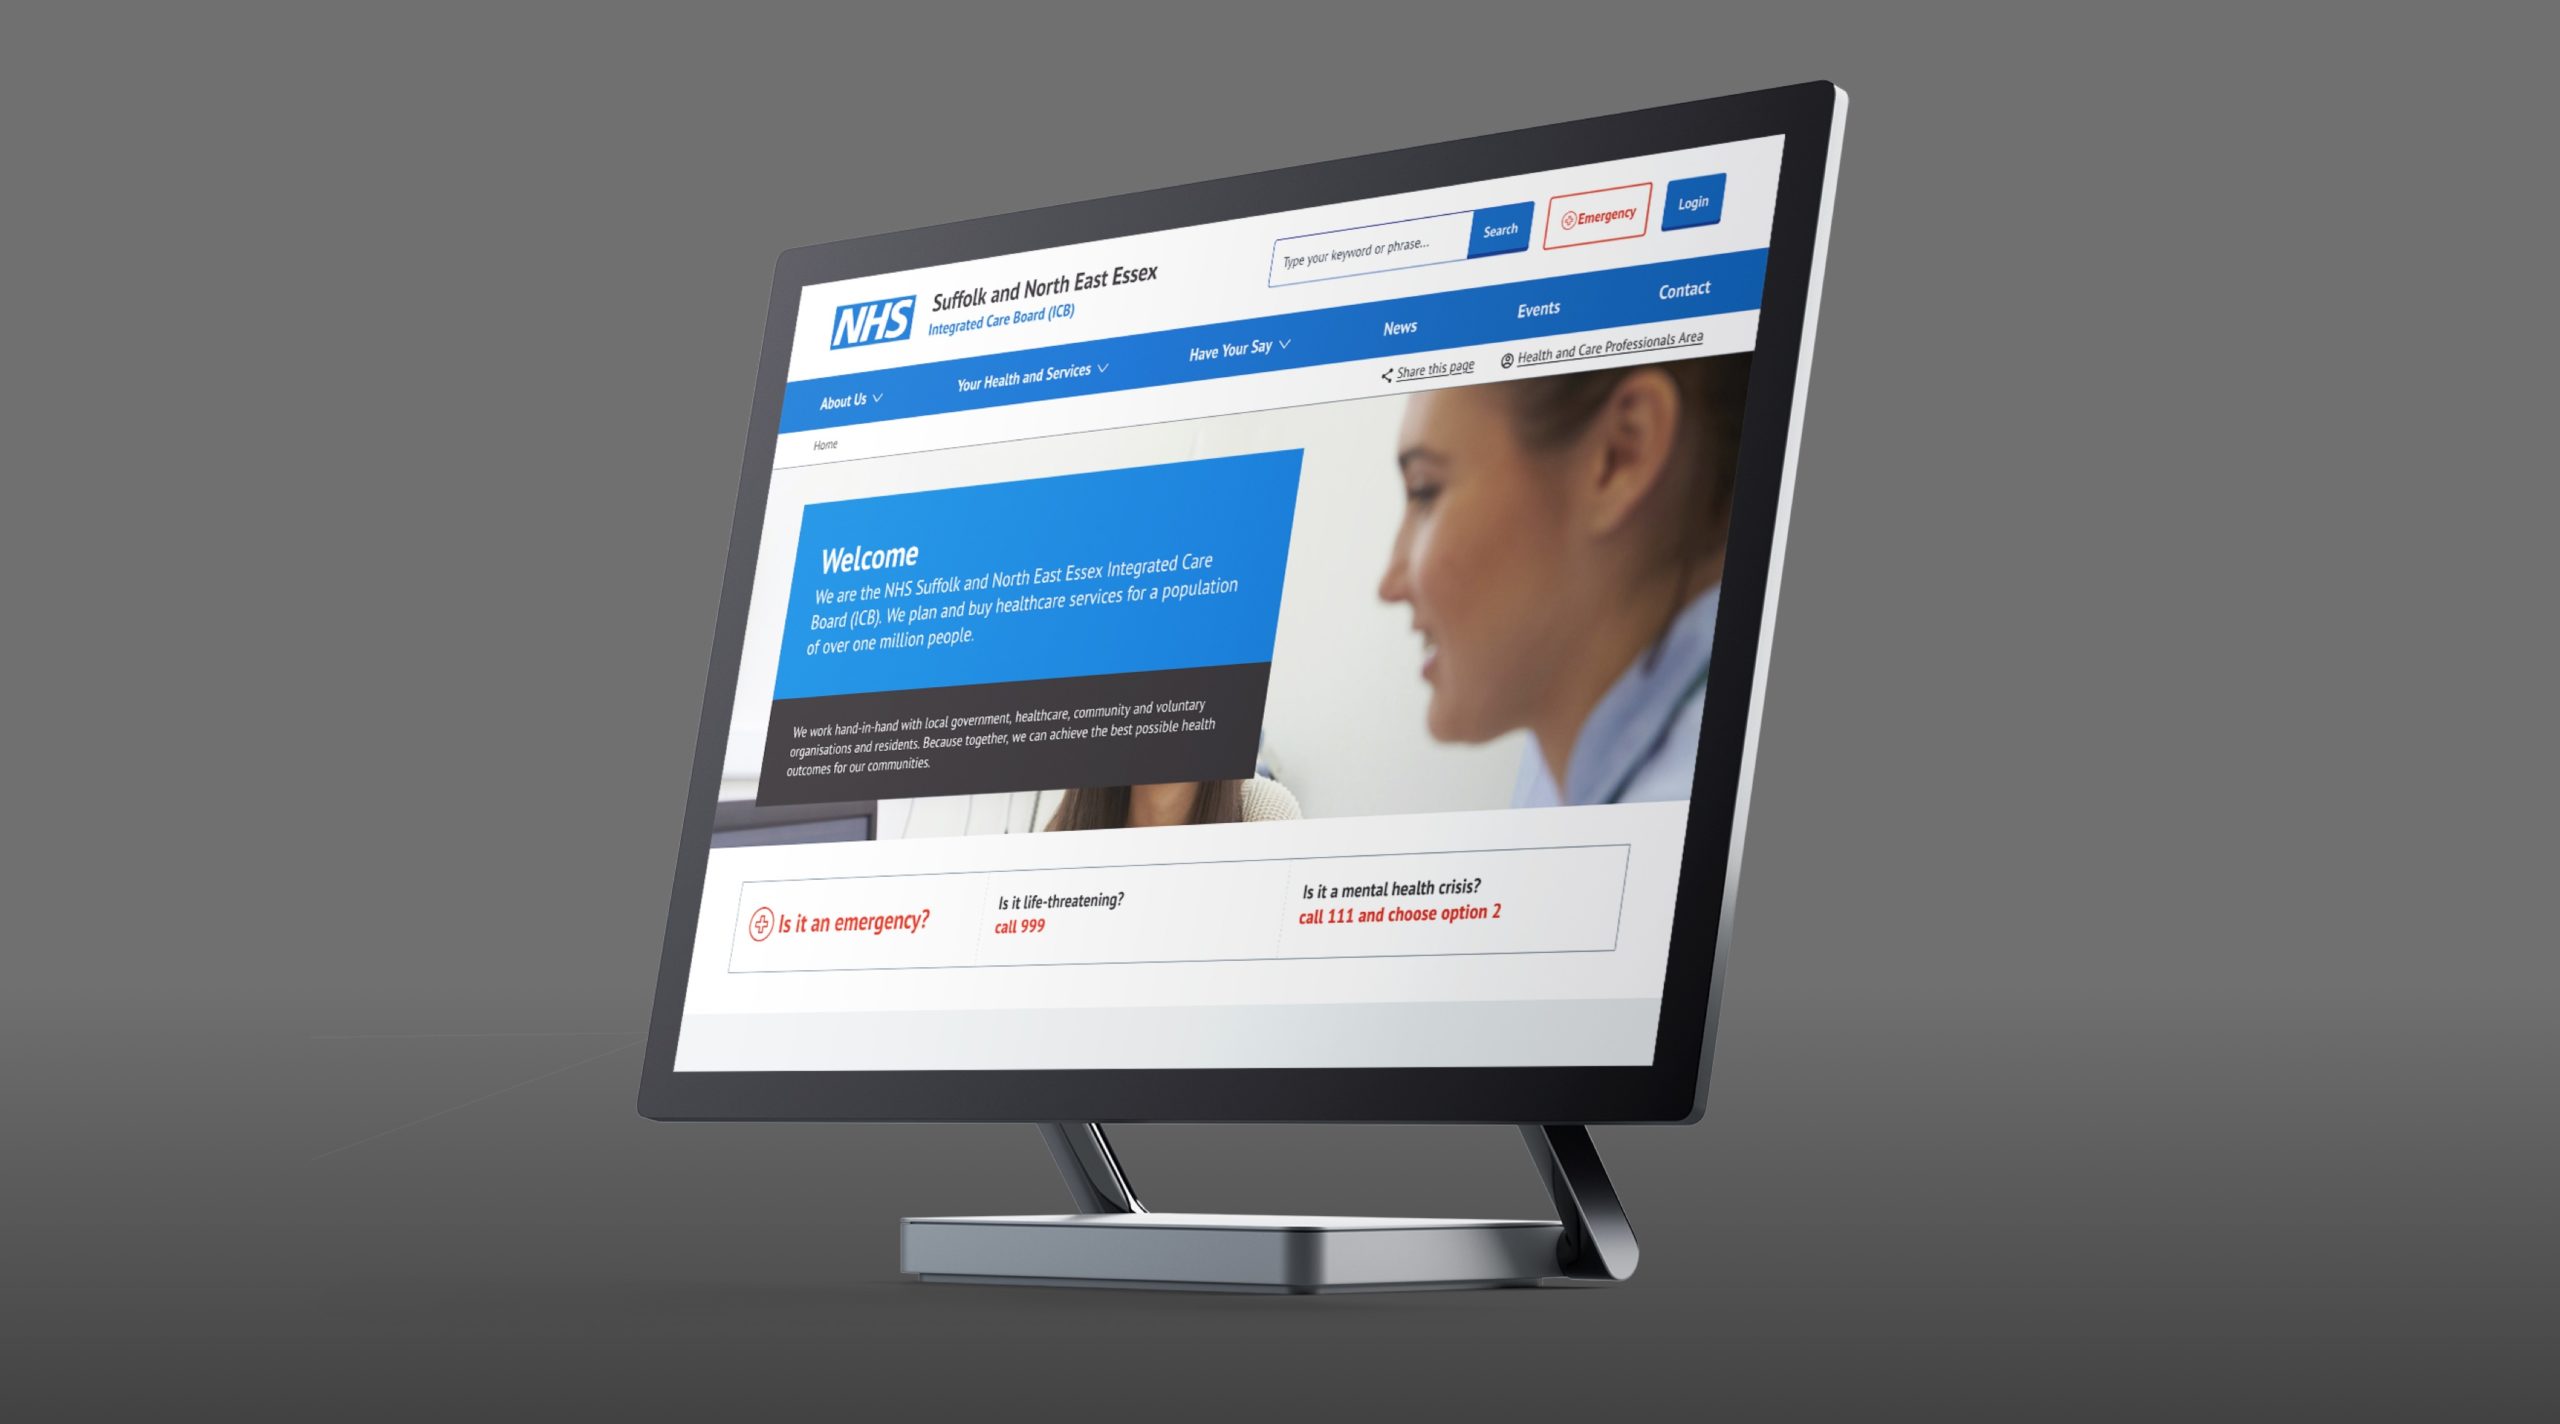 NHS Suffolk and North East Essex Integrated Care Board website